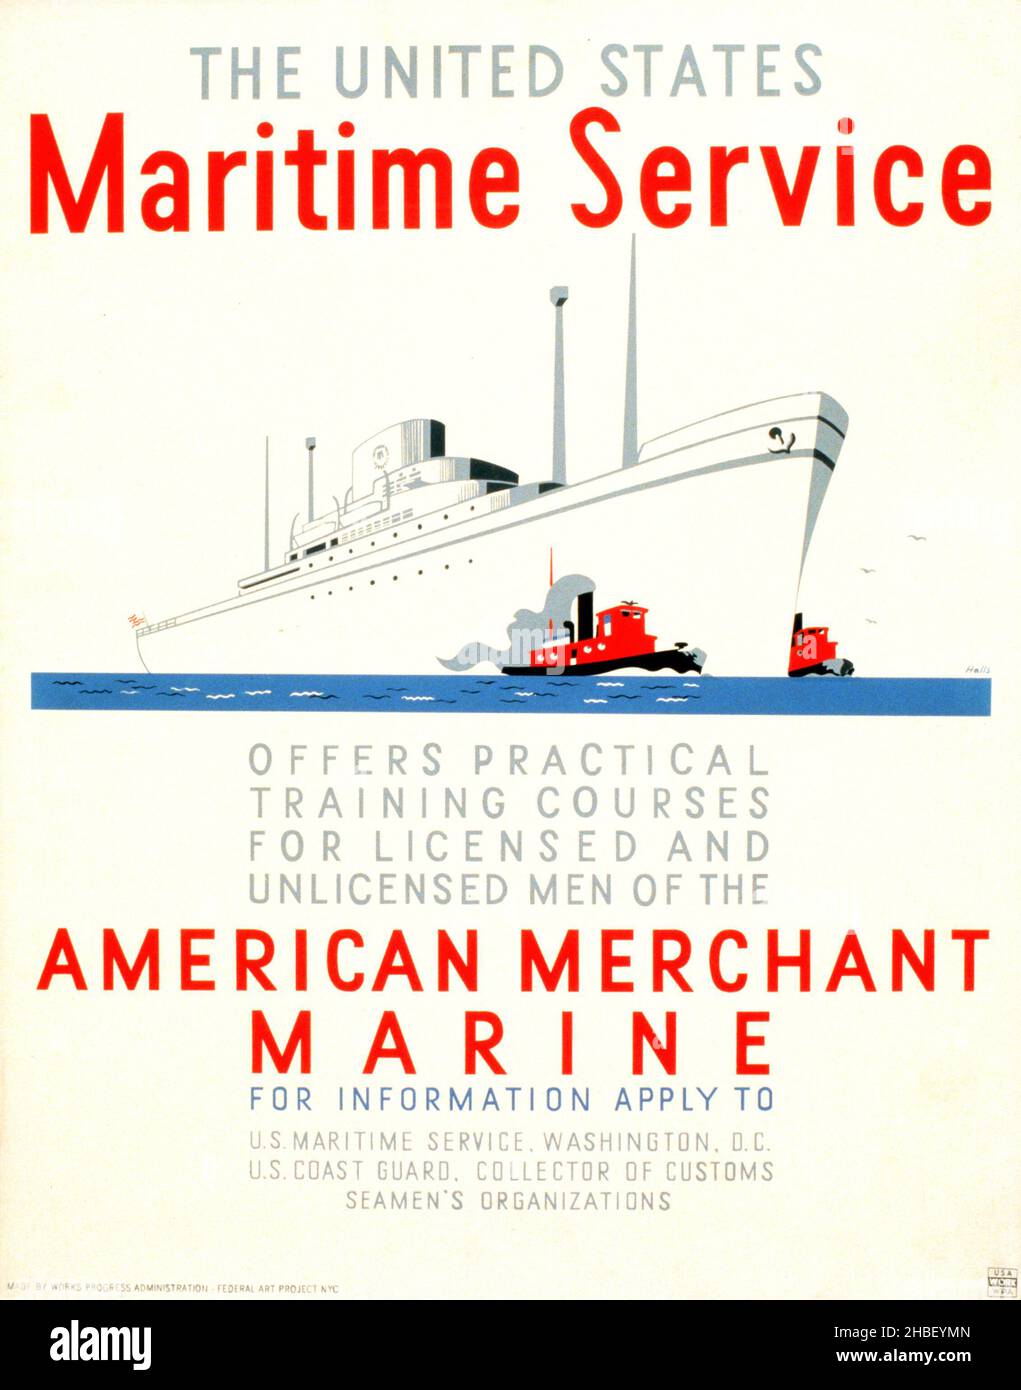 Federal Art Project in New York City, c. 1936, for the United States Maritime Service - training courses to members of the American Merchant Marine. Stock Photo